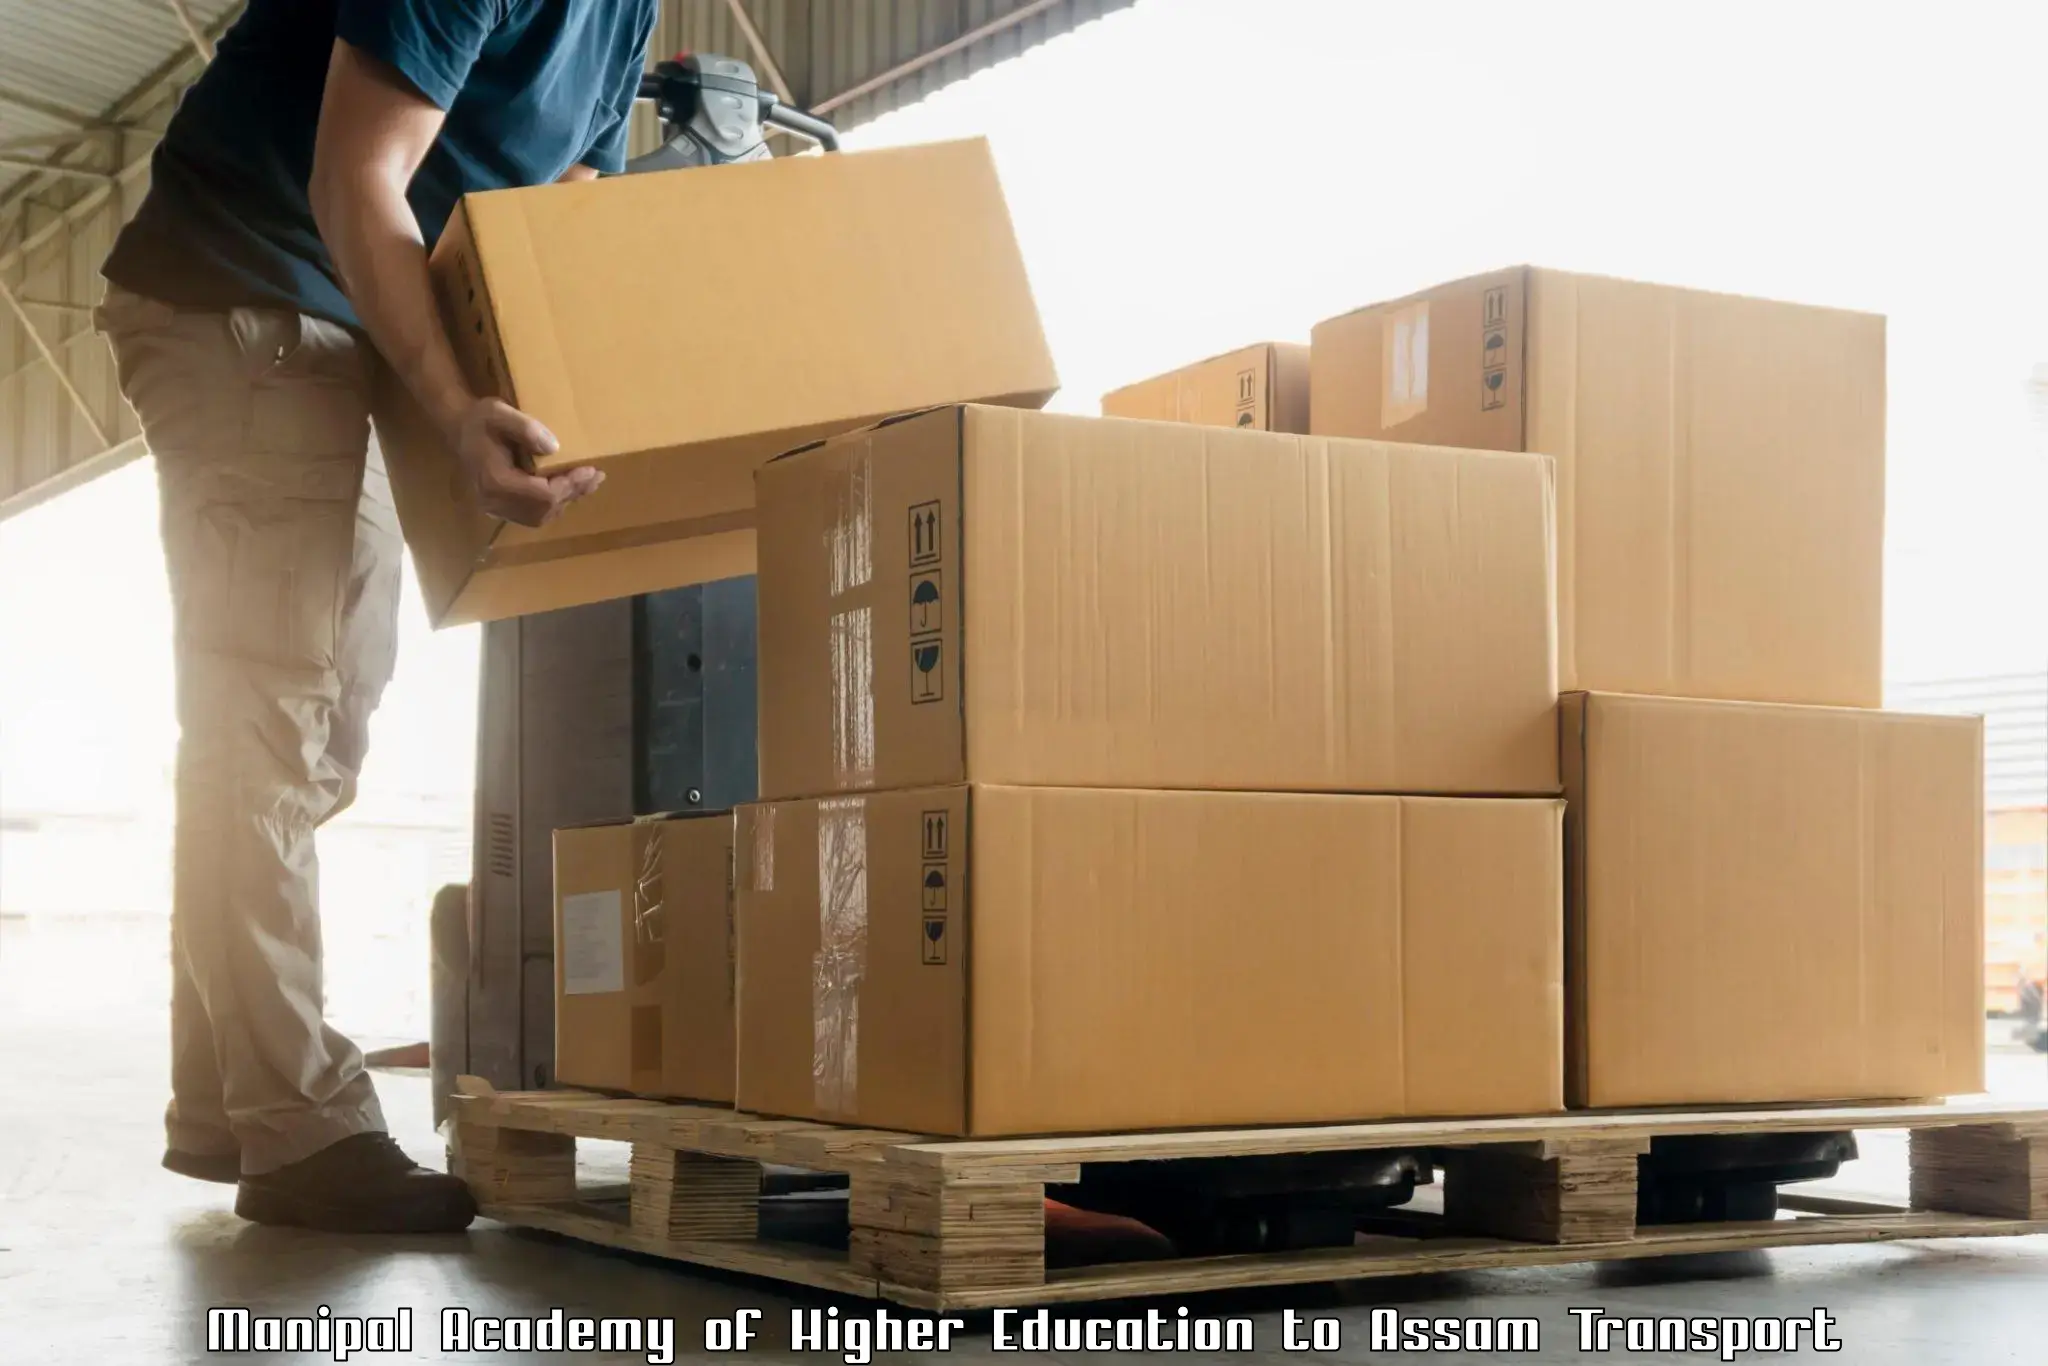 Parcel transport services Manipal Academy of Higher Education to Assam